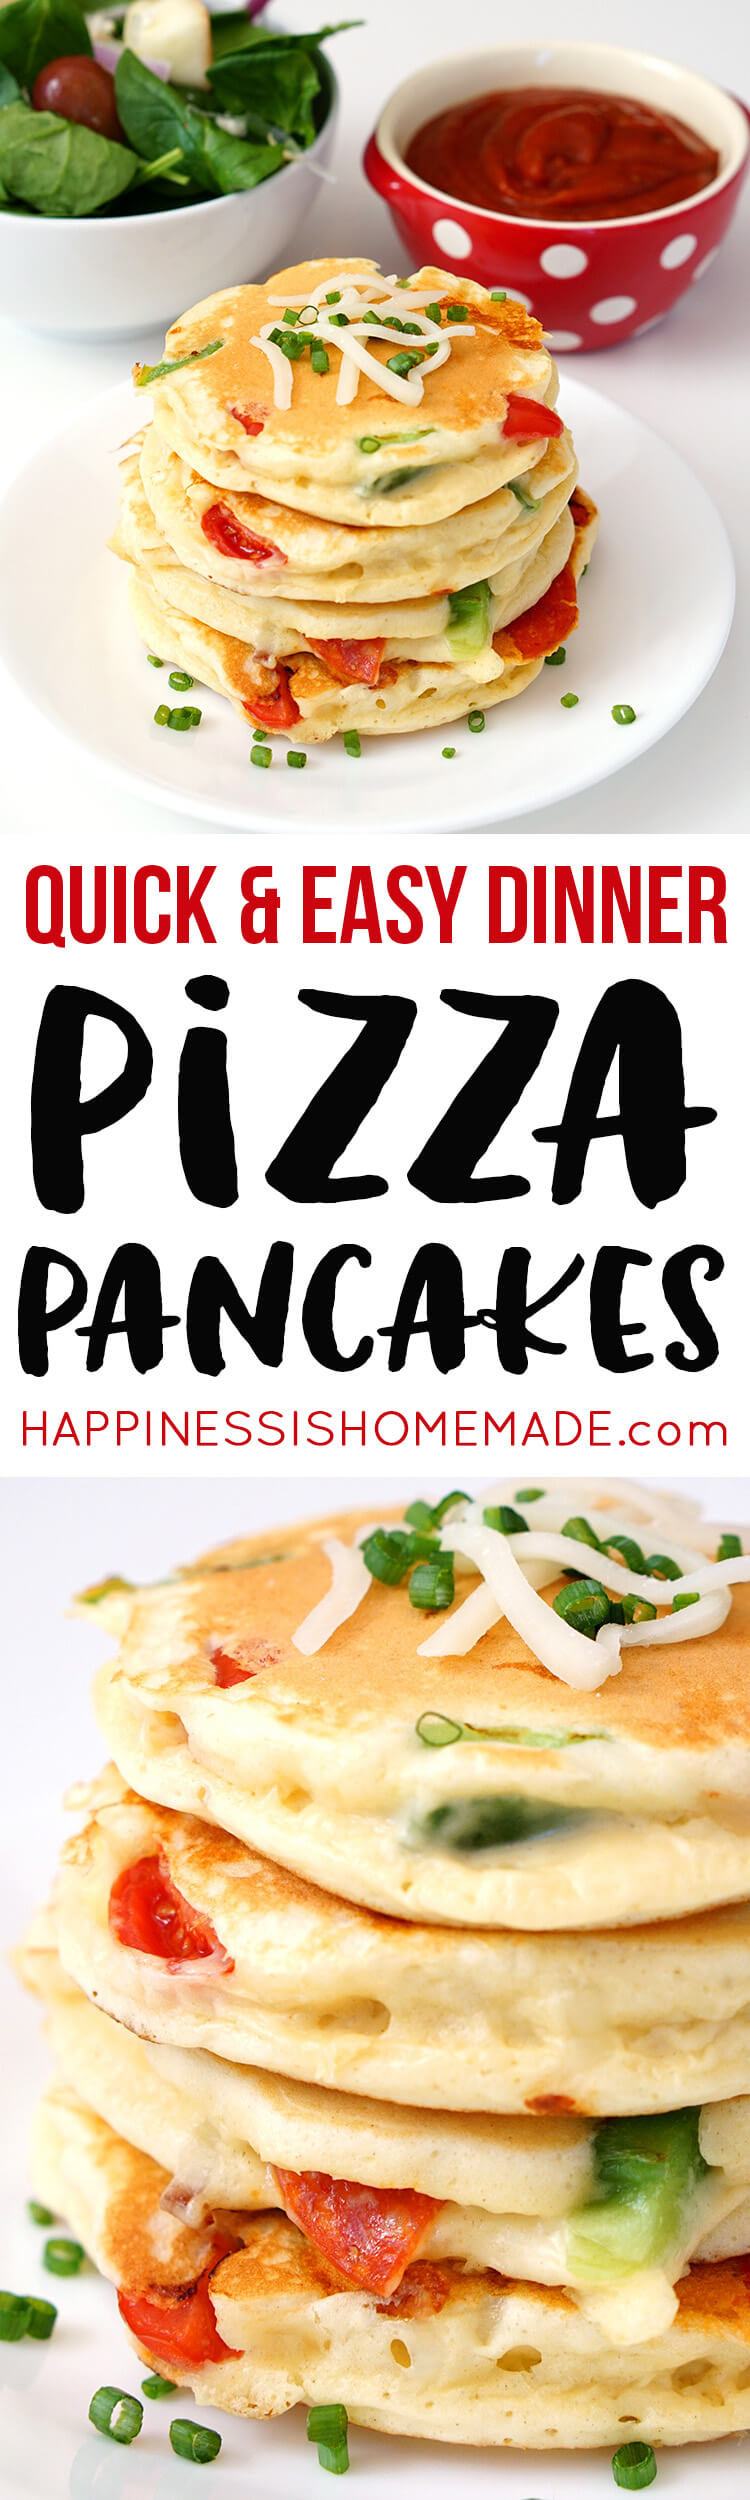 Fast And Easy Dinner Recipes
 Pizza Pancakes Quick & Easy Dinner Idea Happiness is